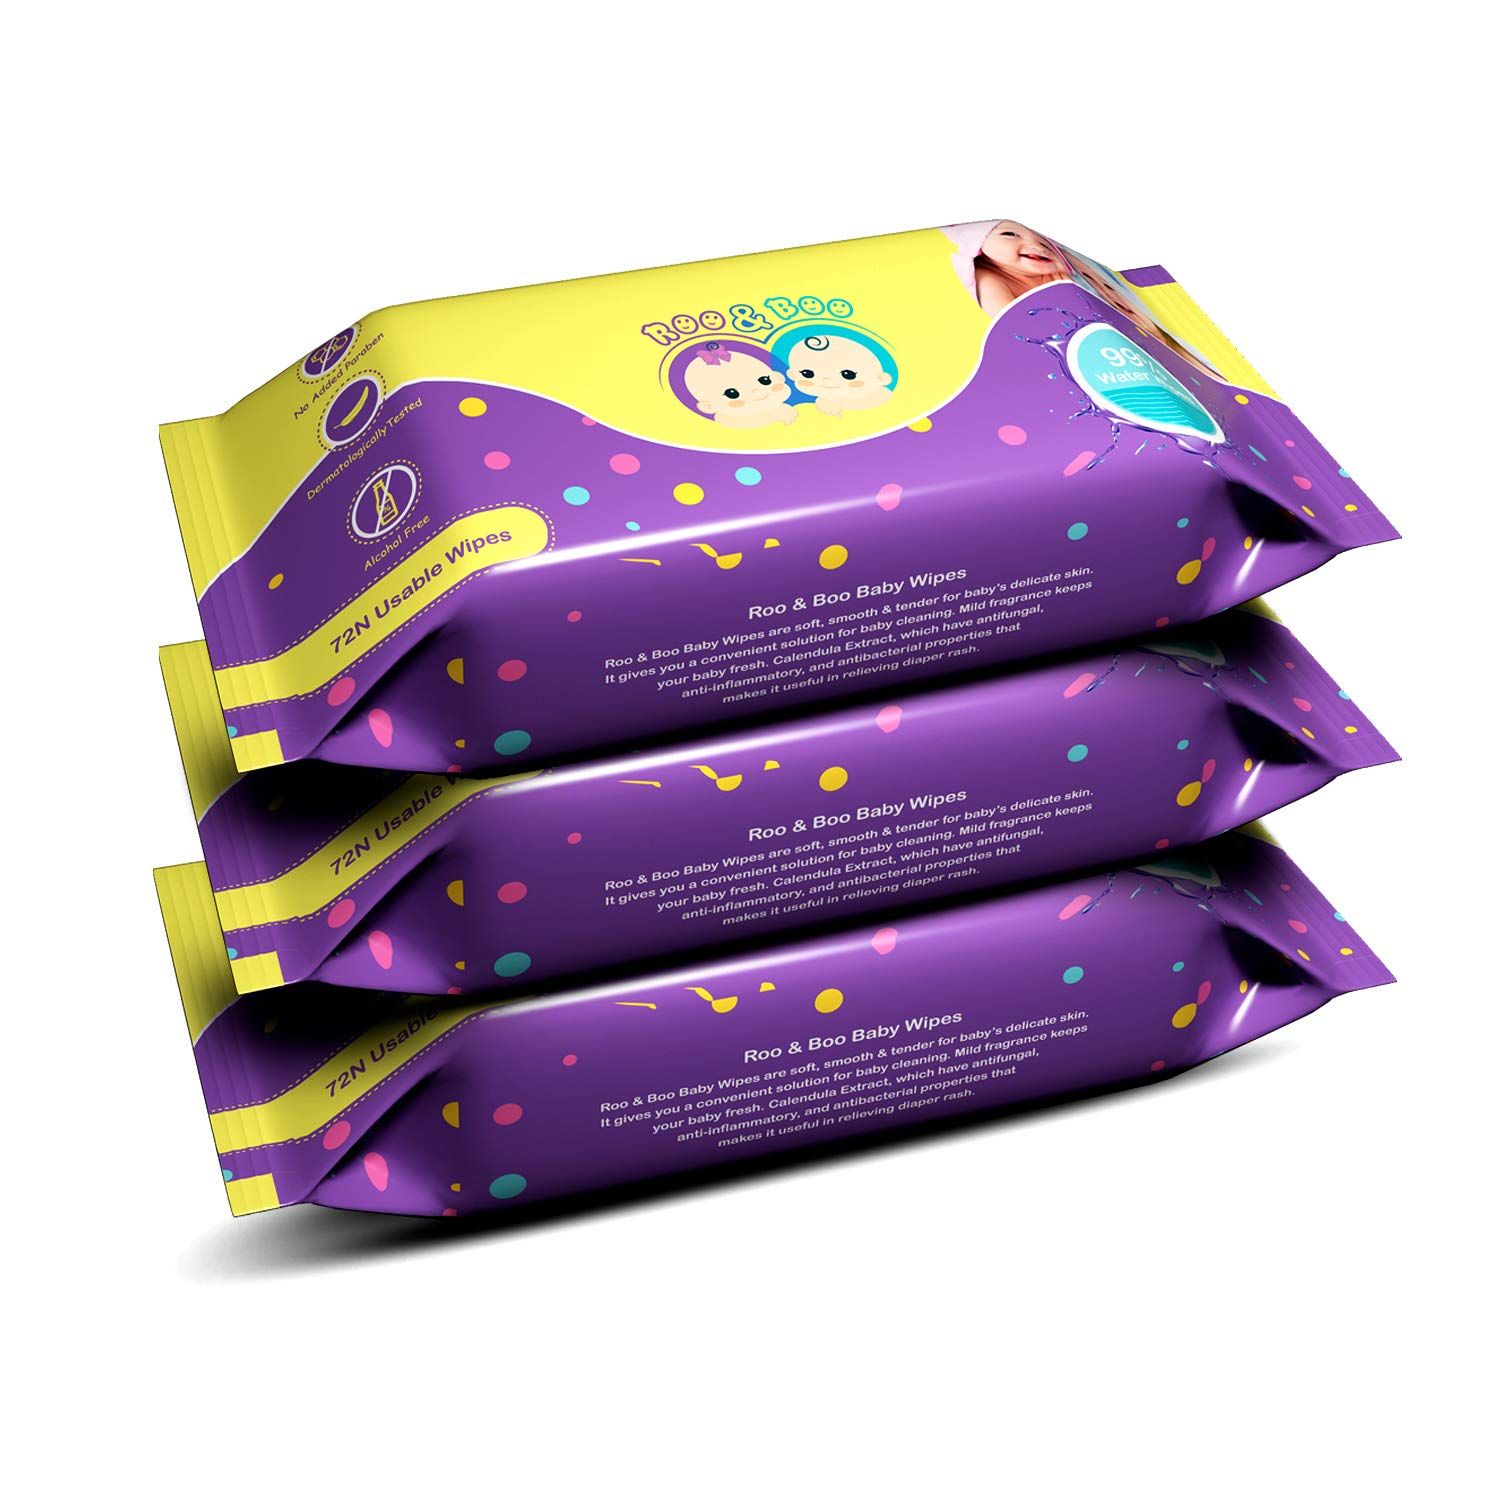 Roo & Boo Baby Wet Wipes - Paraben Free 99% Water Wipes (72 pcs/pack) (Pack of 3)